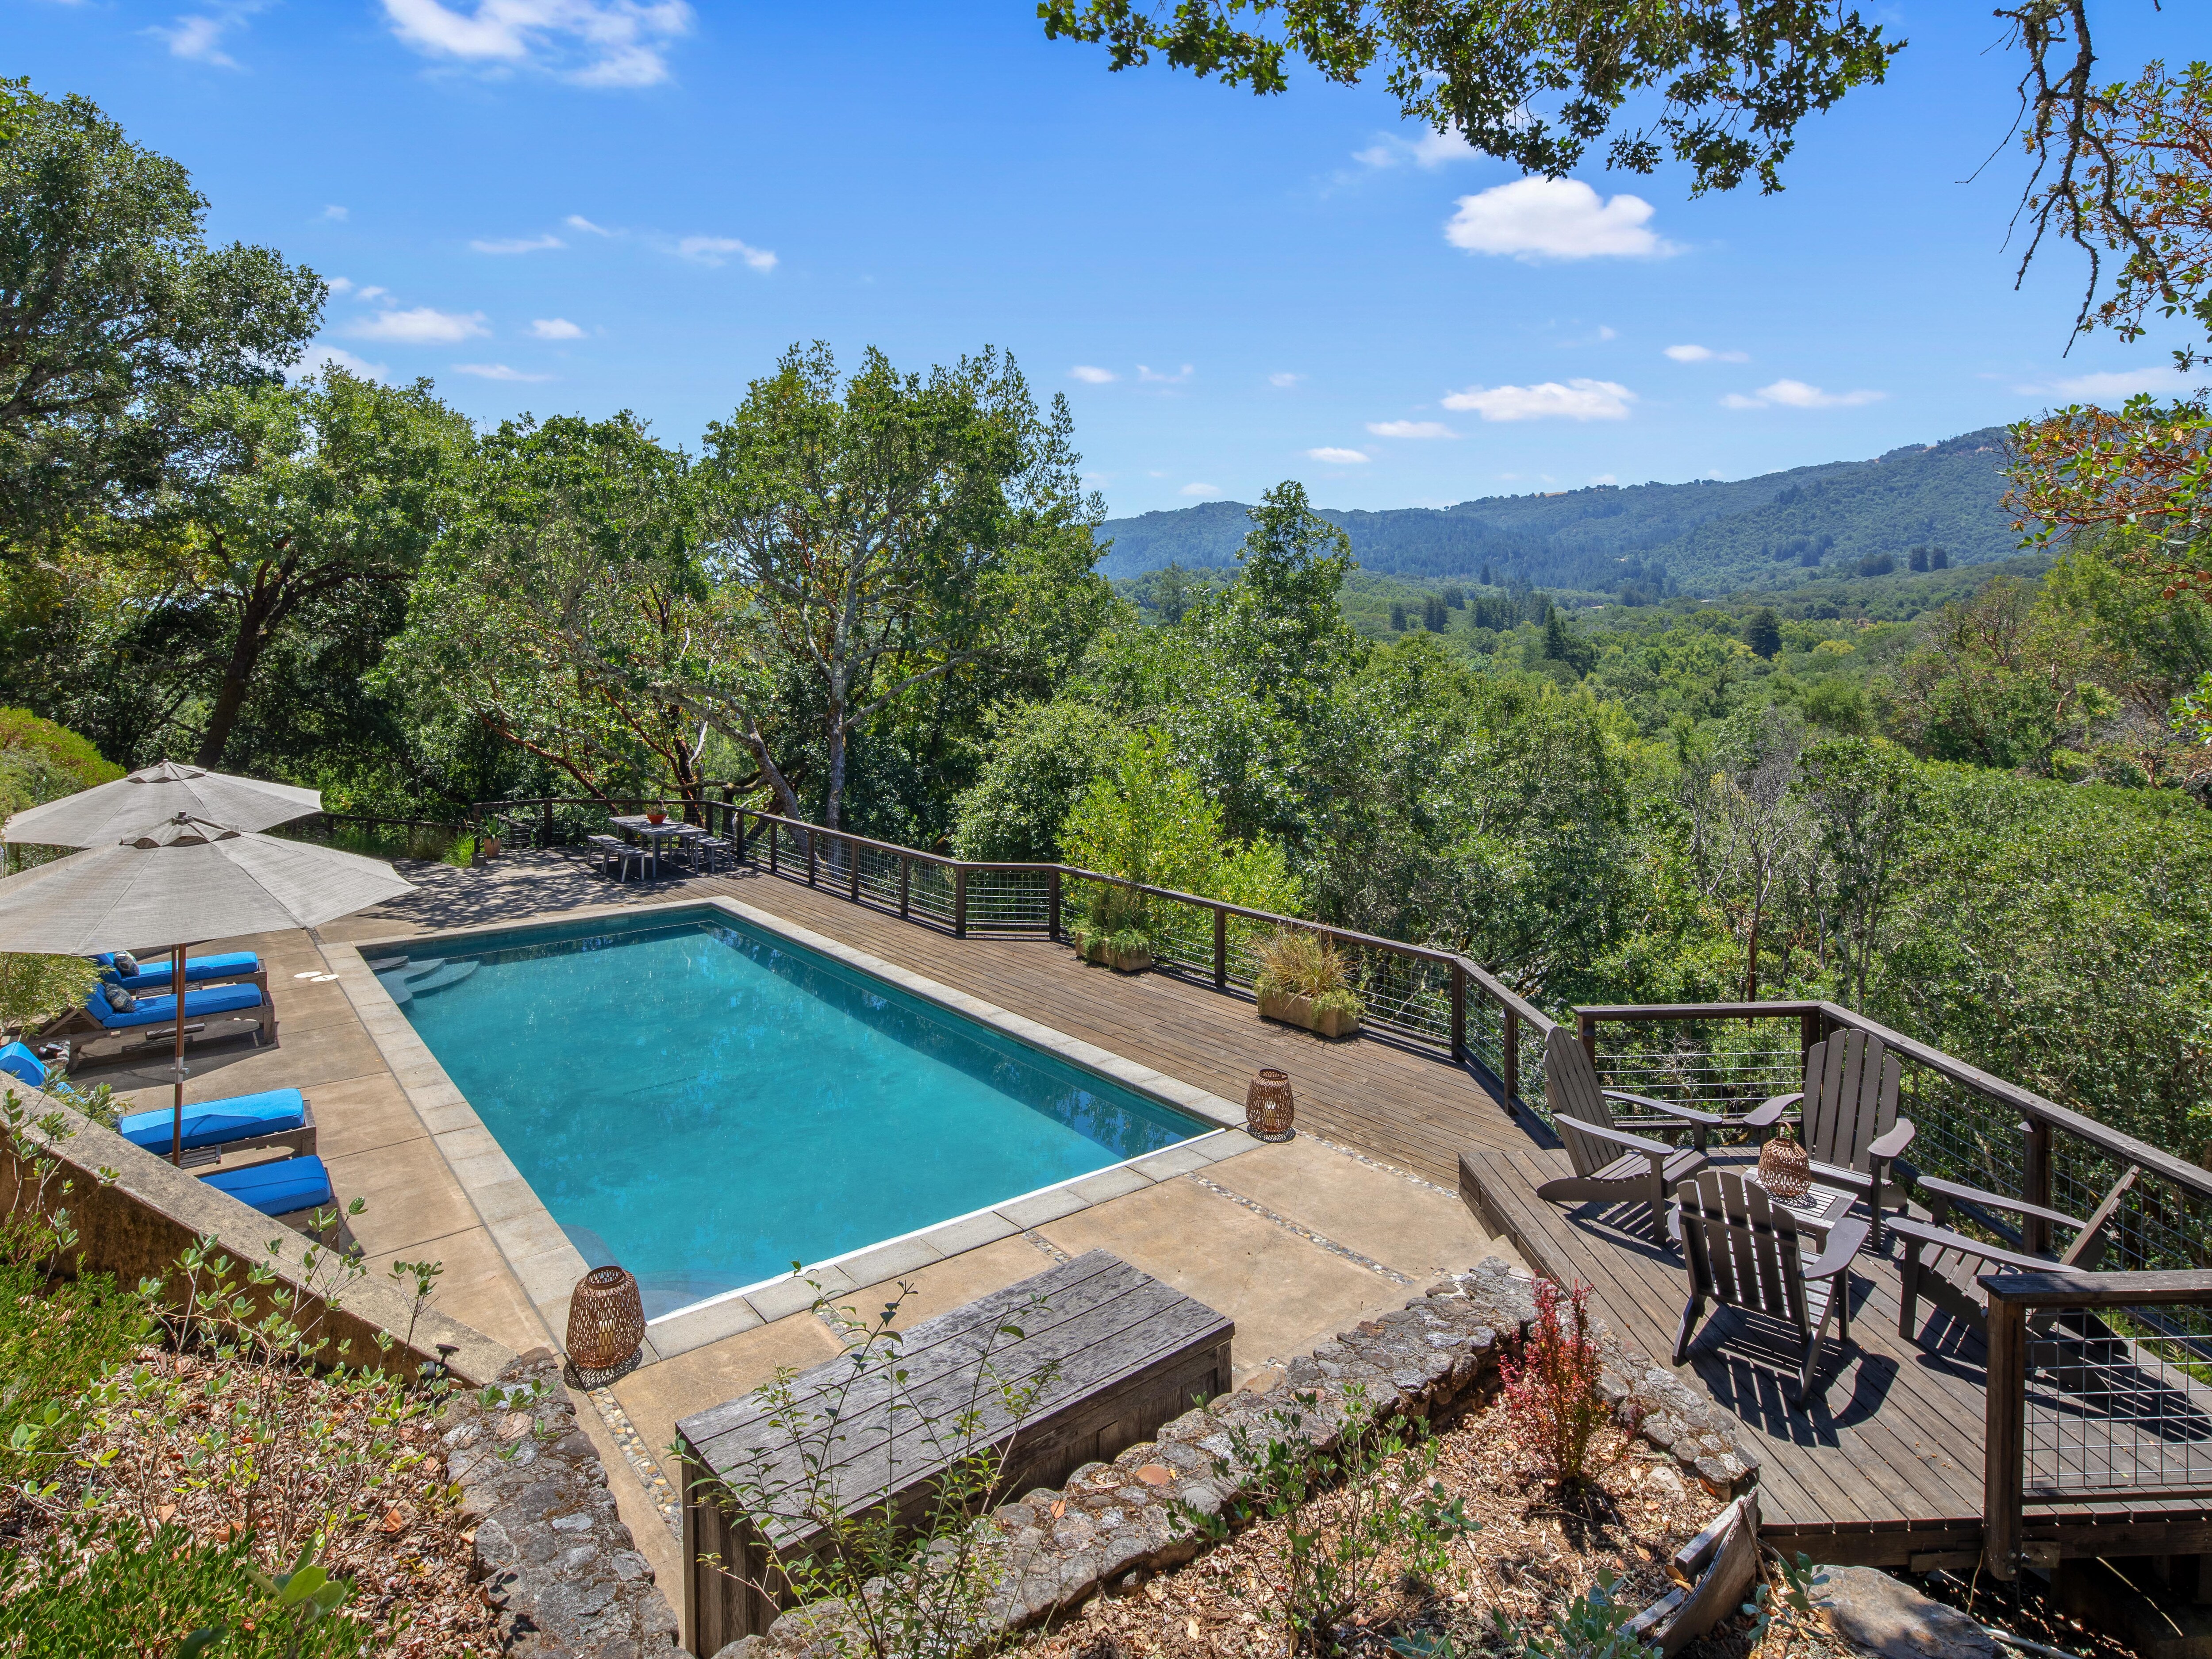 Welcome to Glen Ellen! This home is professionally managed by TurnKey Vacation Rentals.